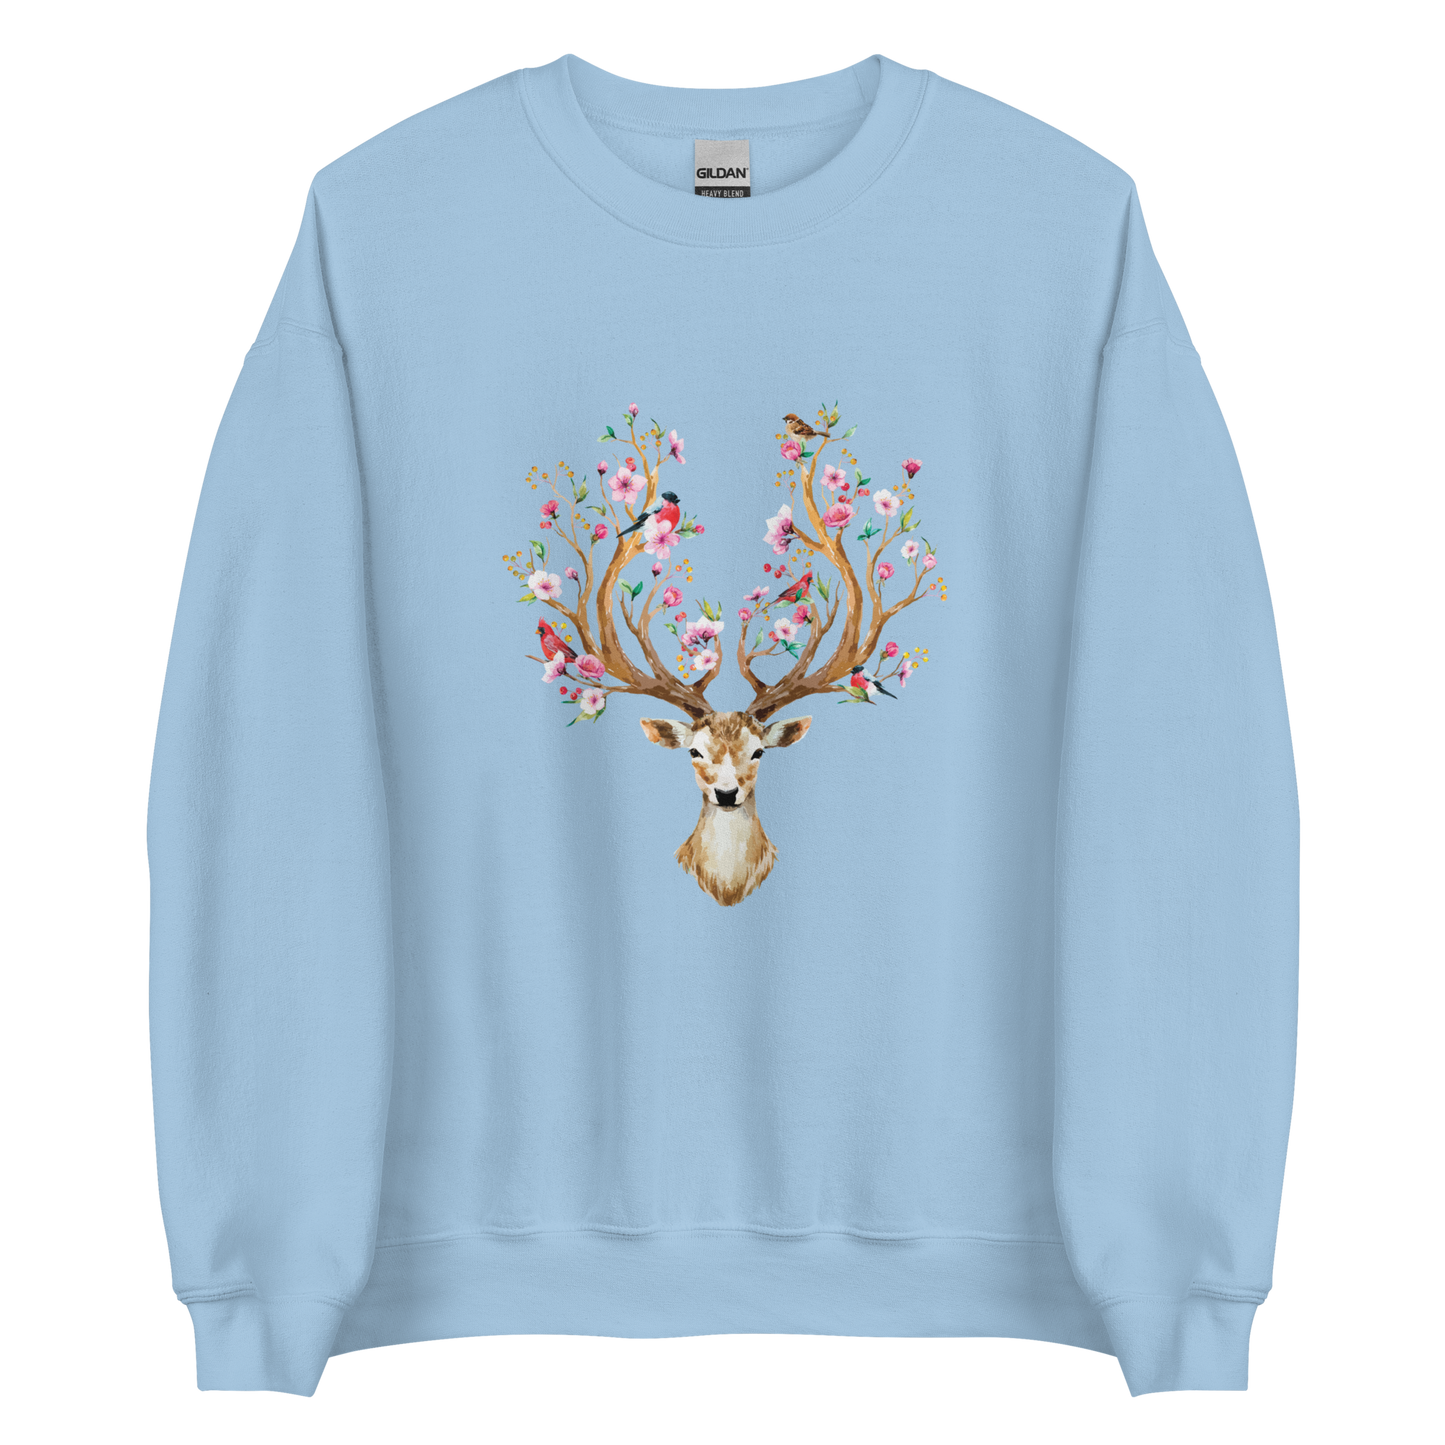 Light Blue Floral Red Deer Sweatshirt featuring a delightful Floral Deer graphic on the chest - Cute Graphic Deer Sweatshirts - Boozy Fox